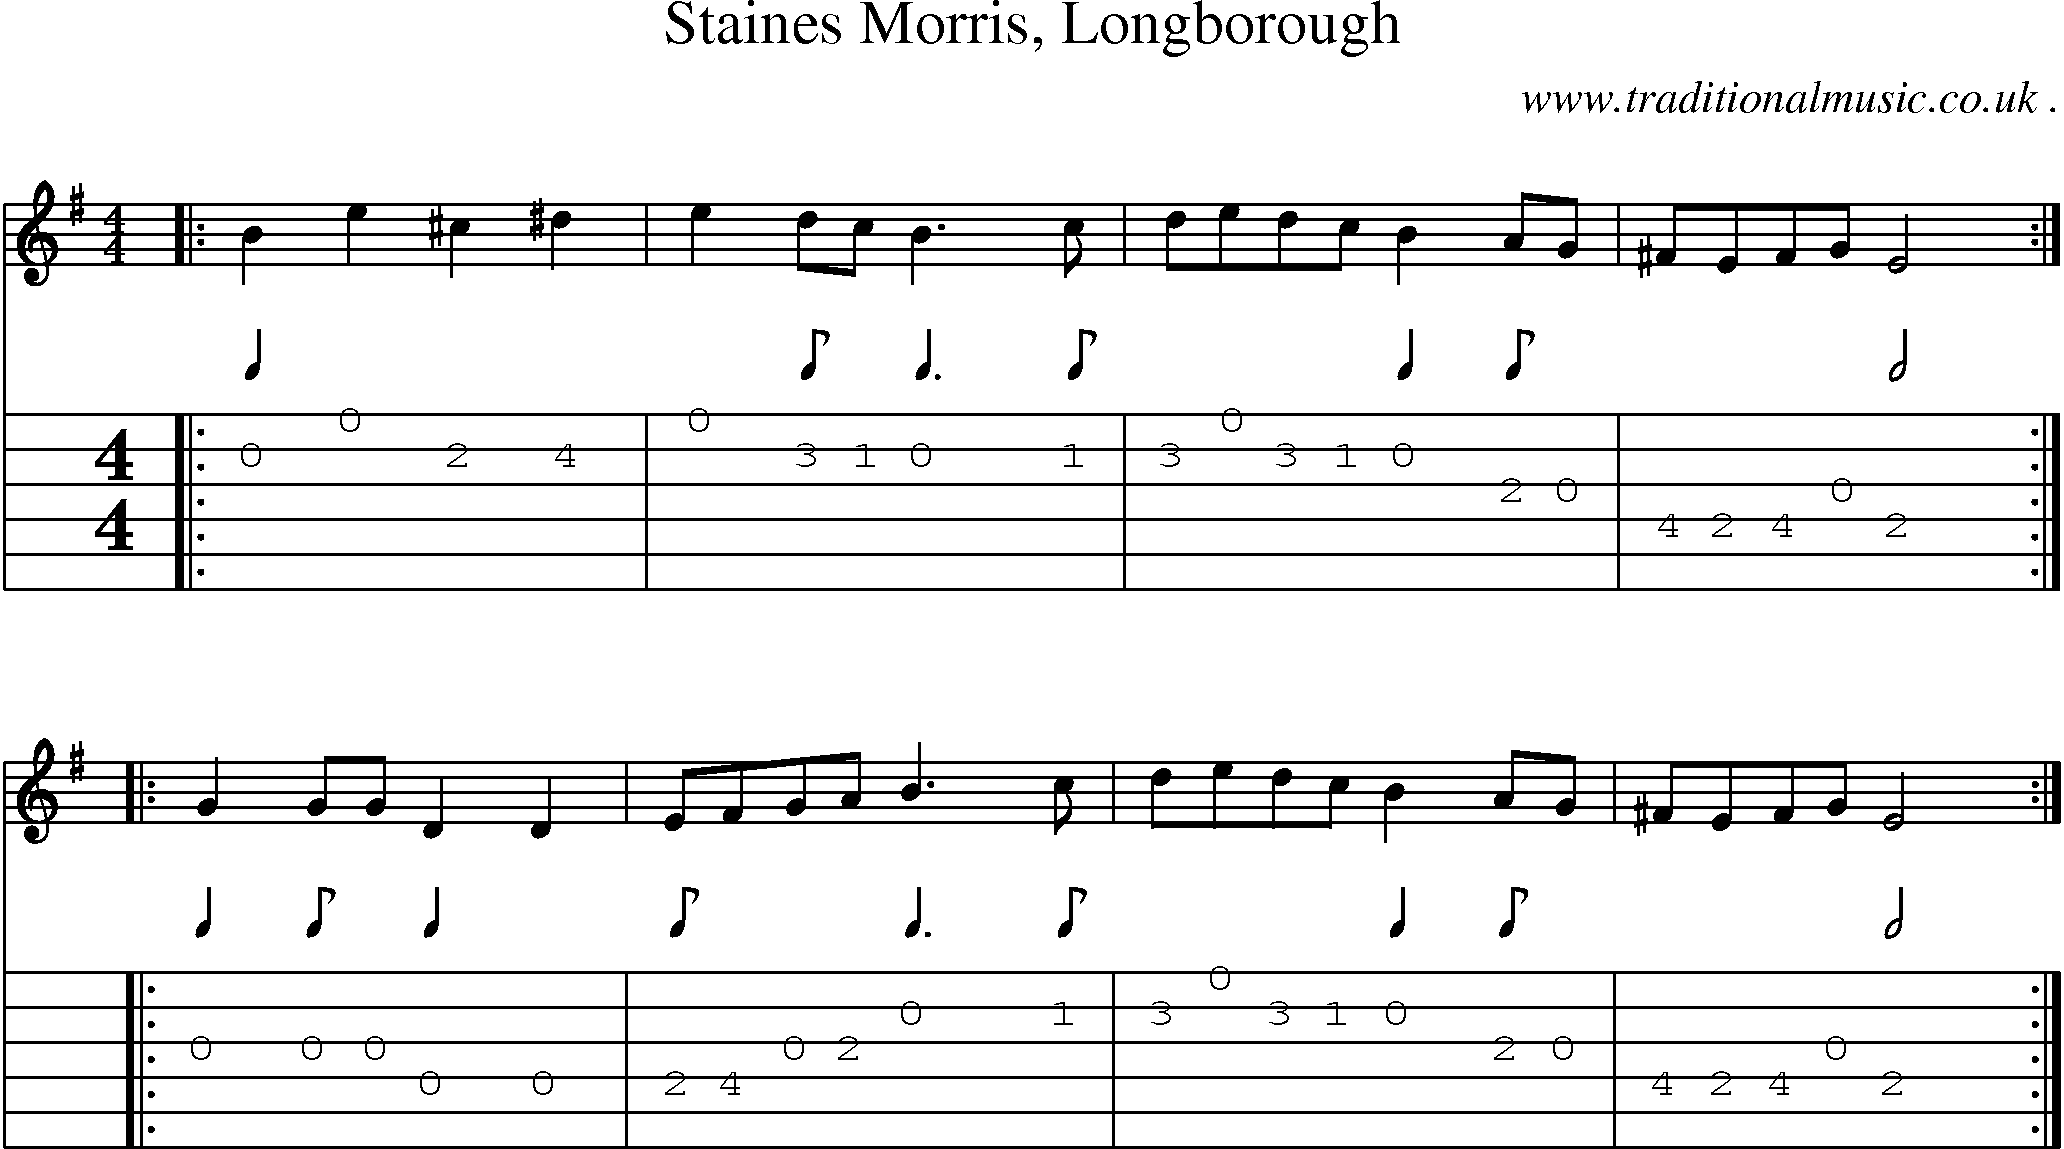 Sheet-Music and Guitar Tabs for Staines Morris Longborough